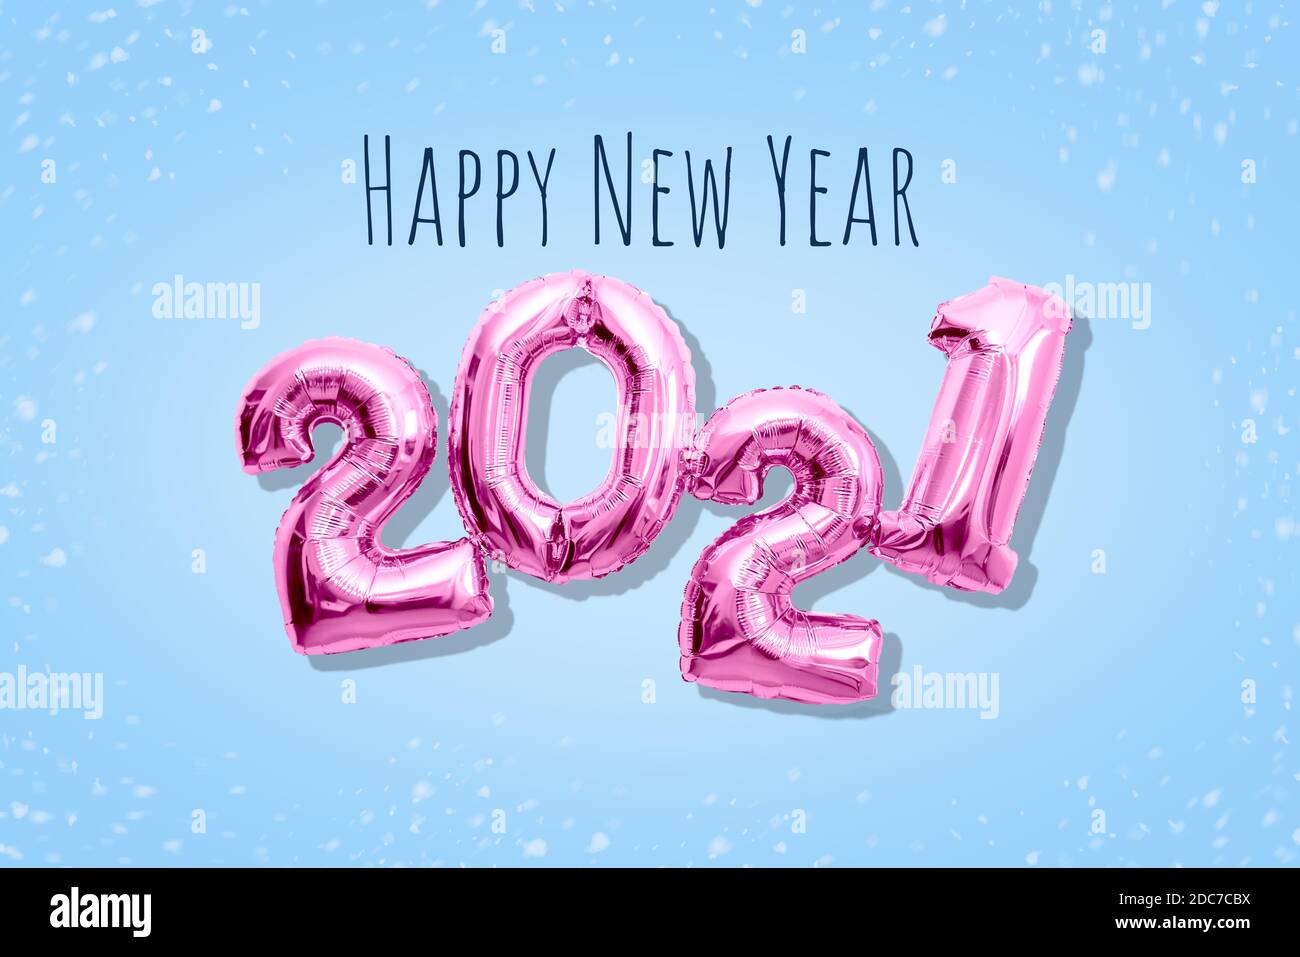 Pink shiny numbers 2021, happy new year concept Stock Photo